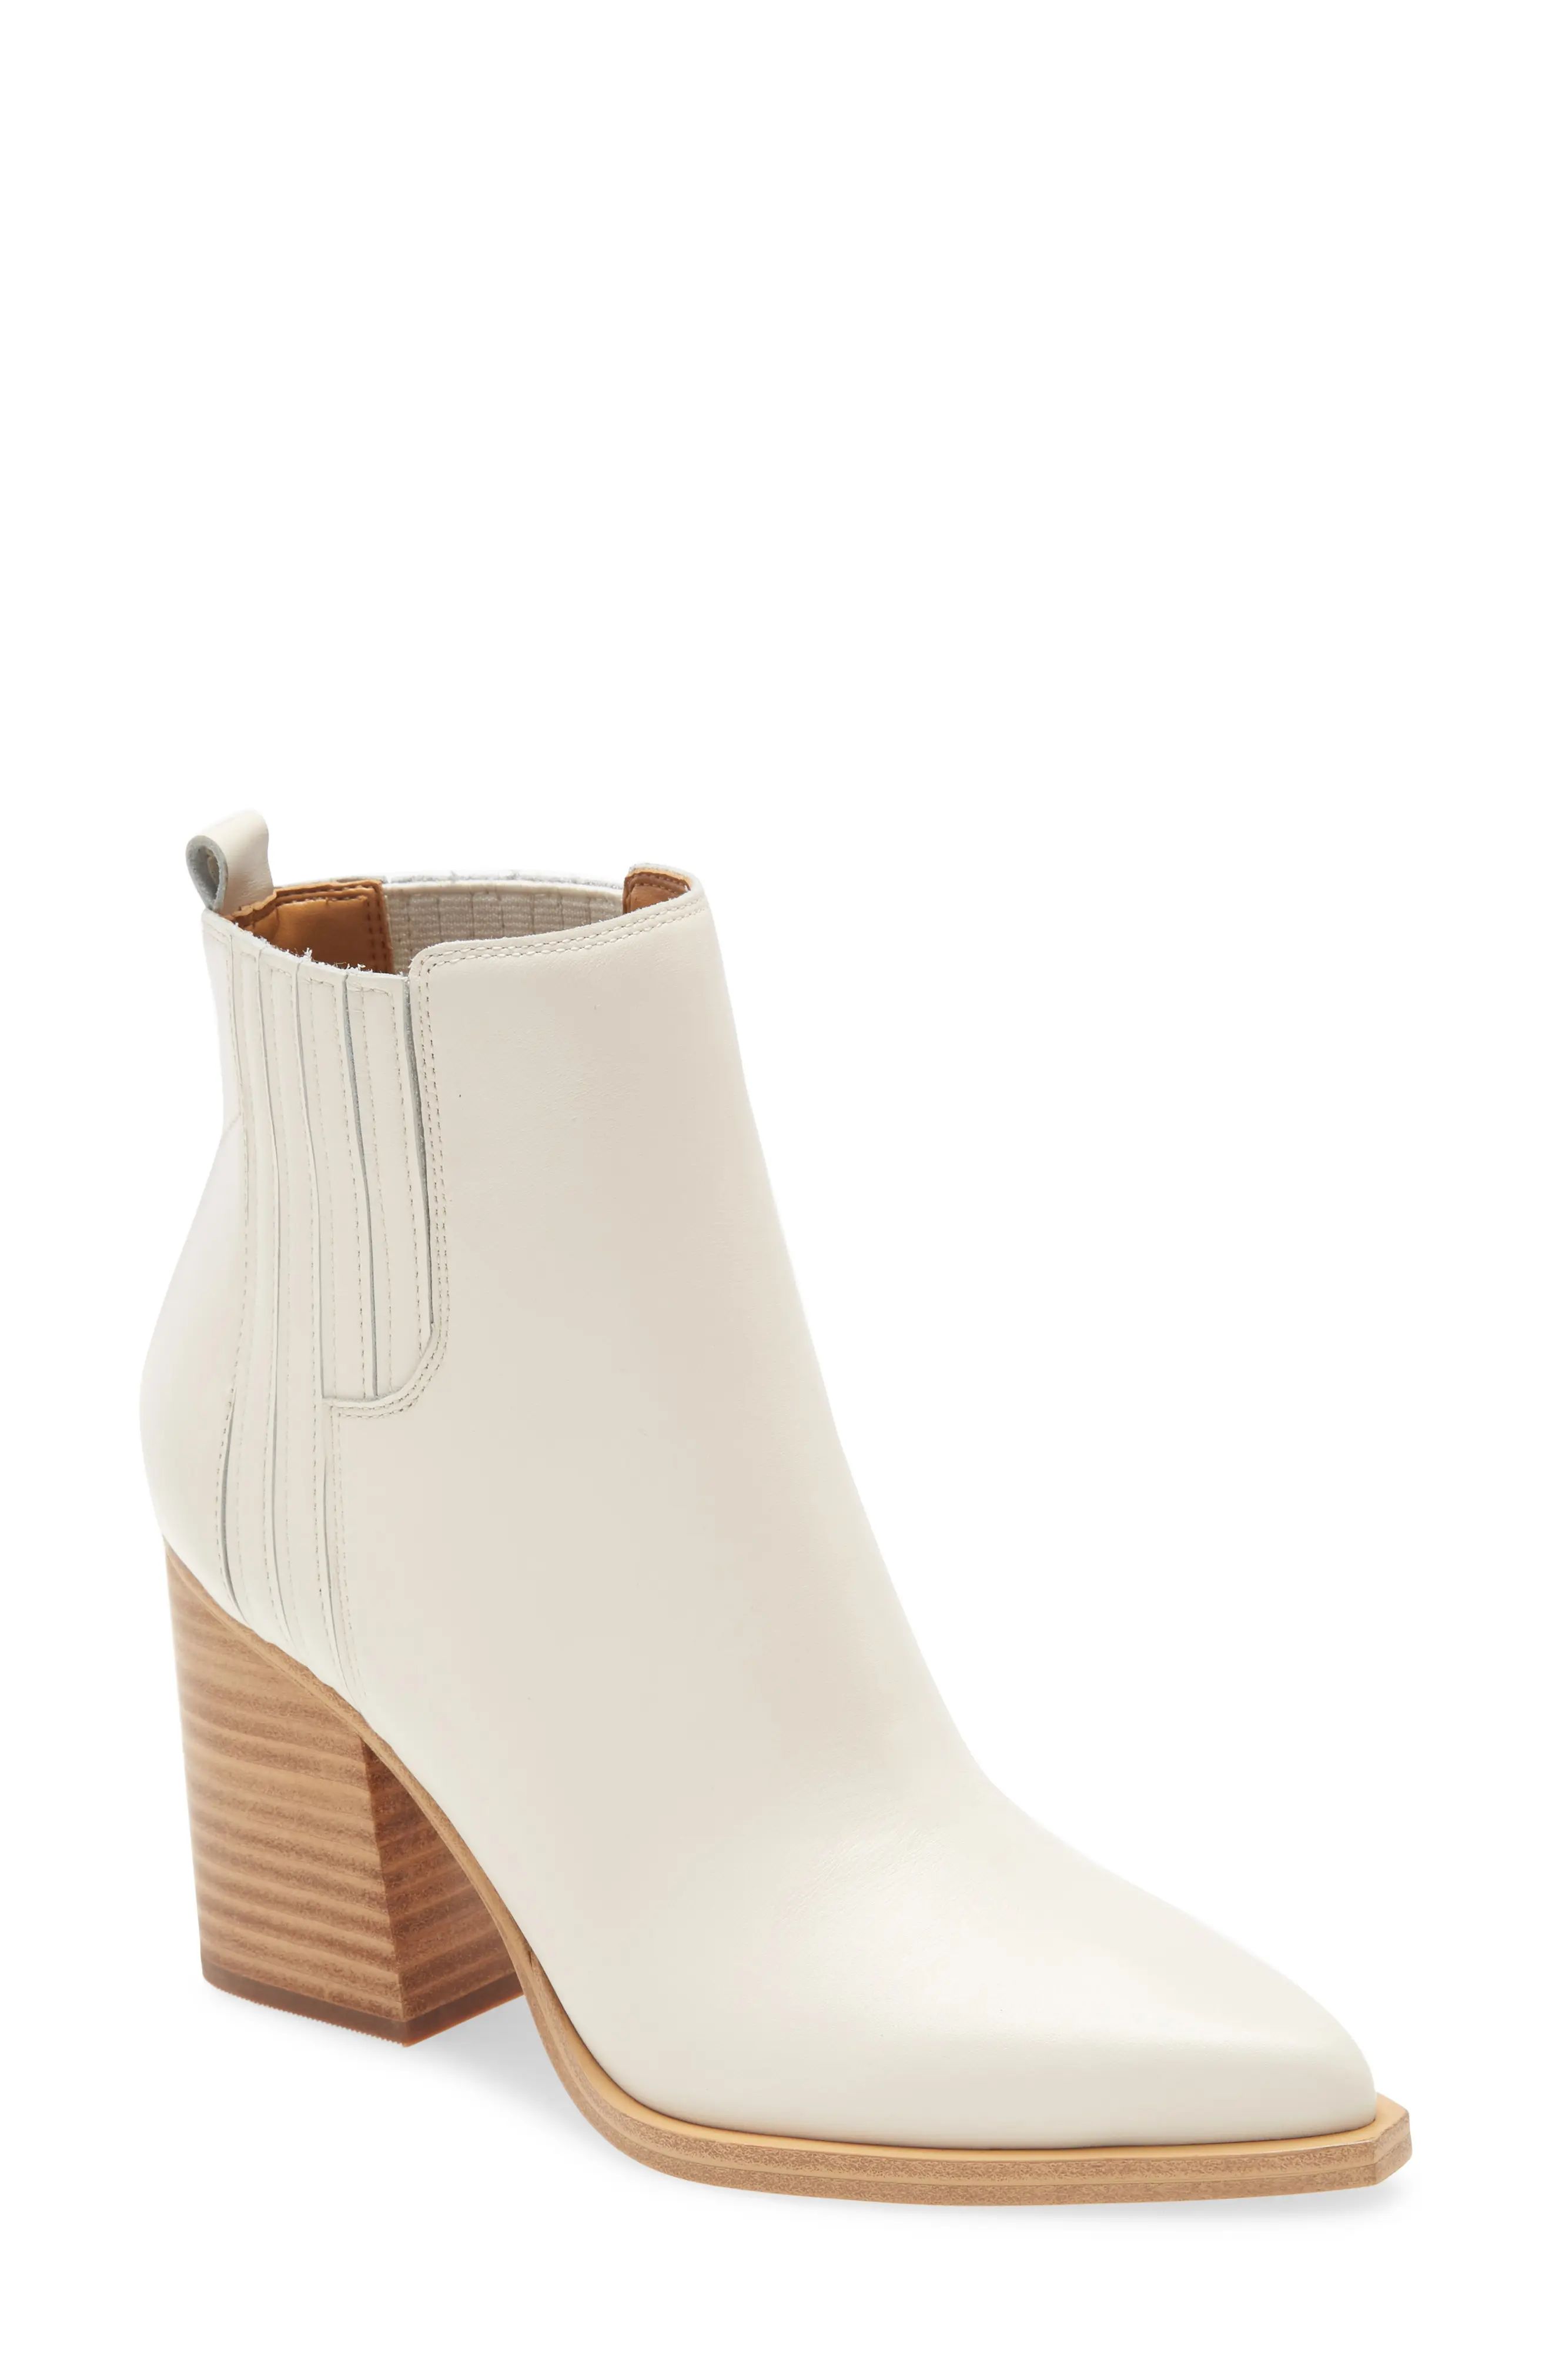 Women's Marc Fisher Ltd Oshay Pointed Toe Bootie, Size 10 M - Ivory | Nordstrom